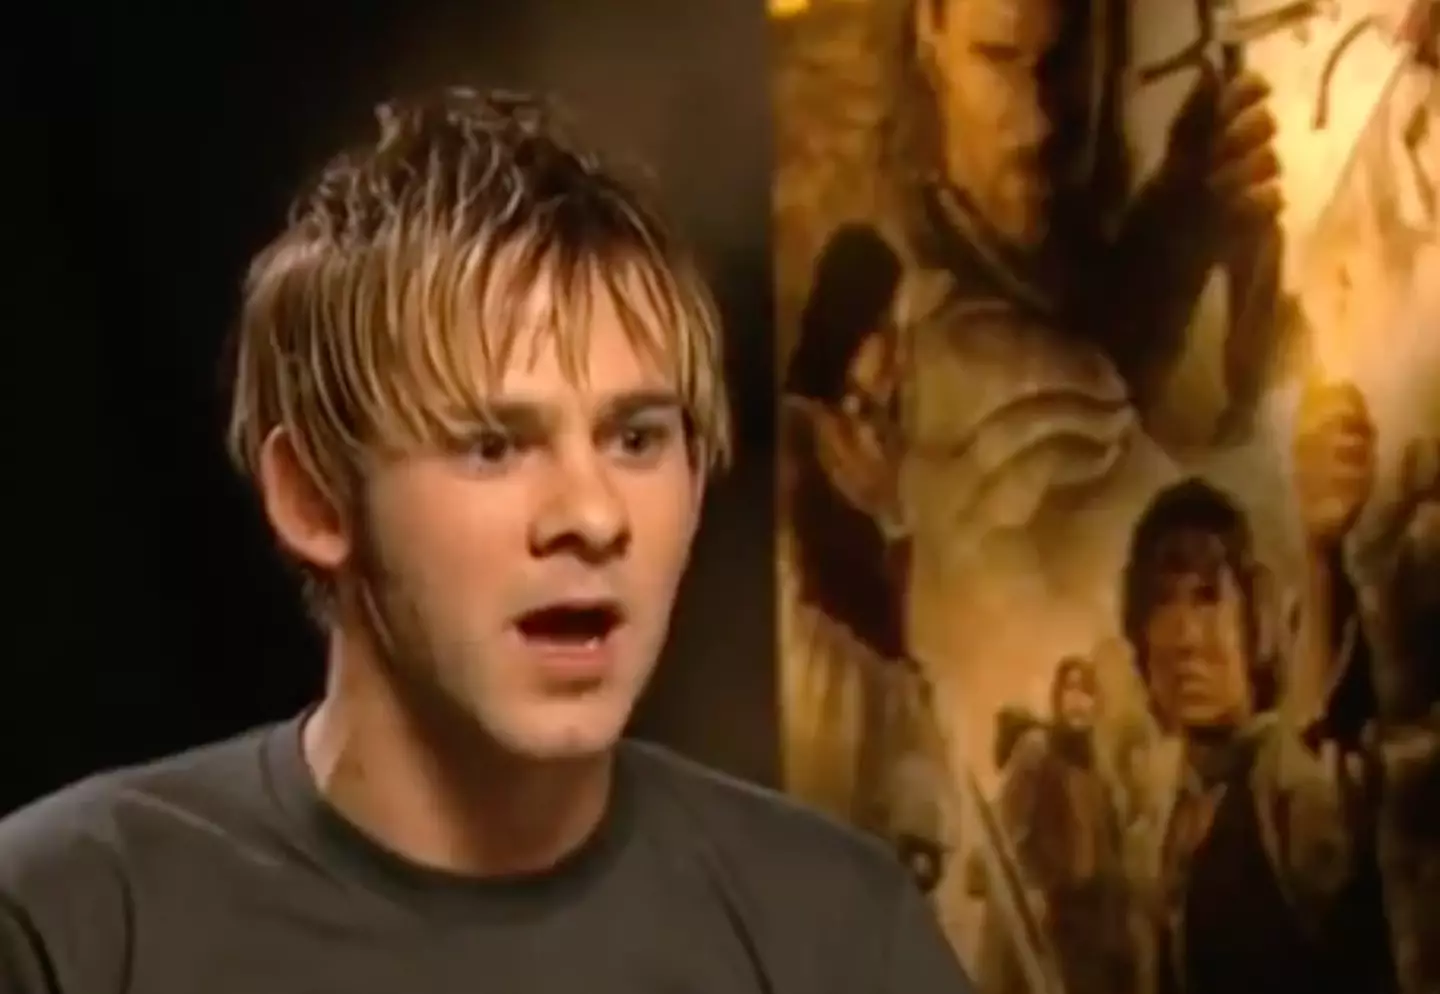 Dominic Monaghan pretend to be a reporter during the skit.